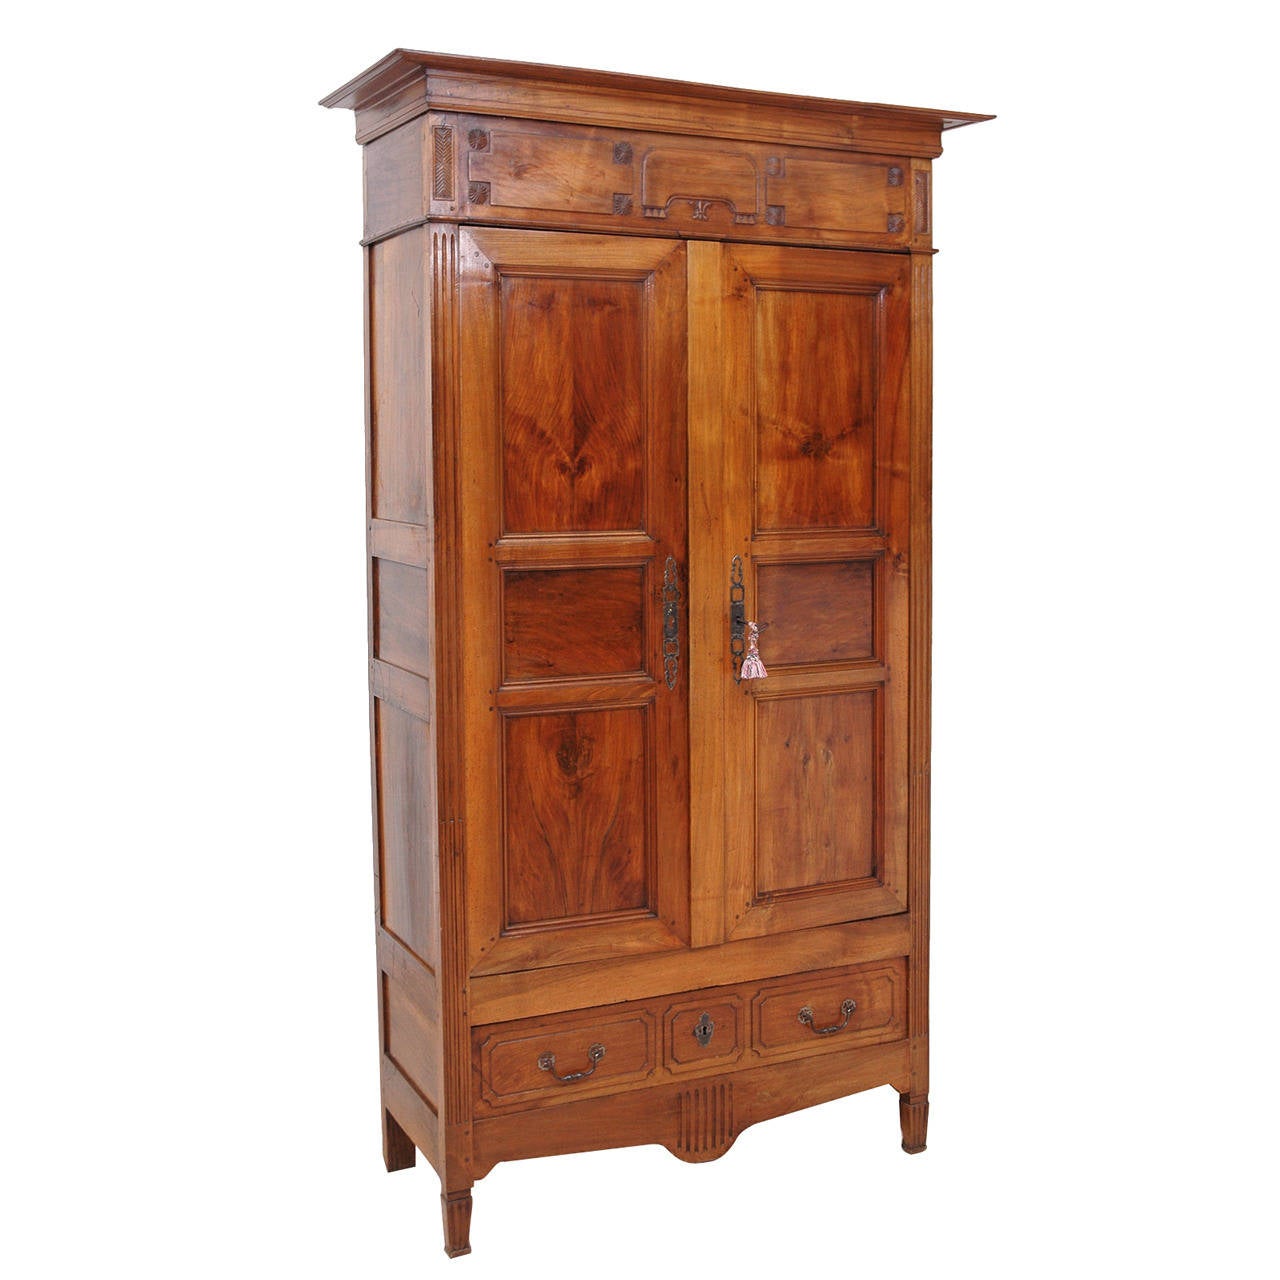 An armoire of statuesque and pleasing proportions given its narrow width and tall stature, in walnut from the Directory period in France (circa 1800). Offers original pulls and key plates, with one exterior drawer. Recent interior carpentry includes